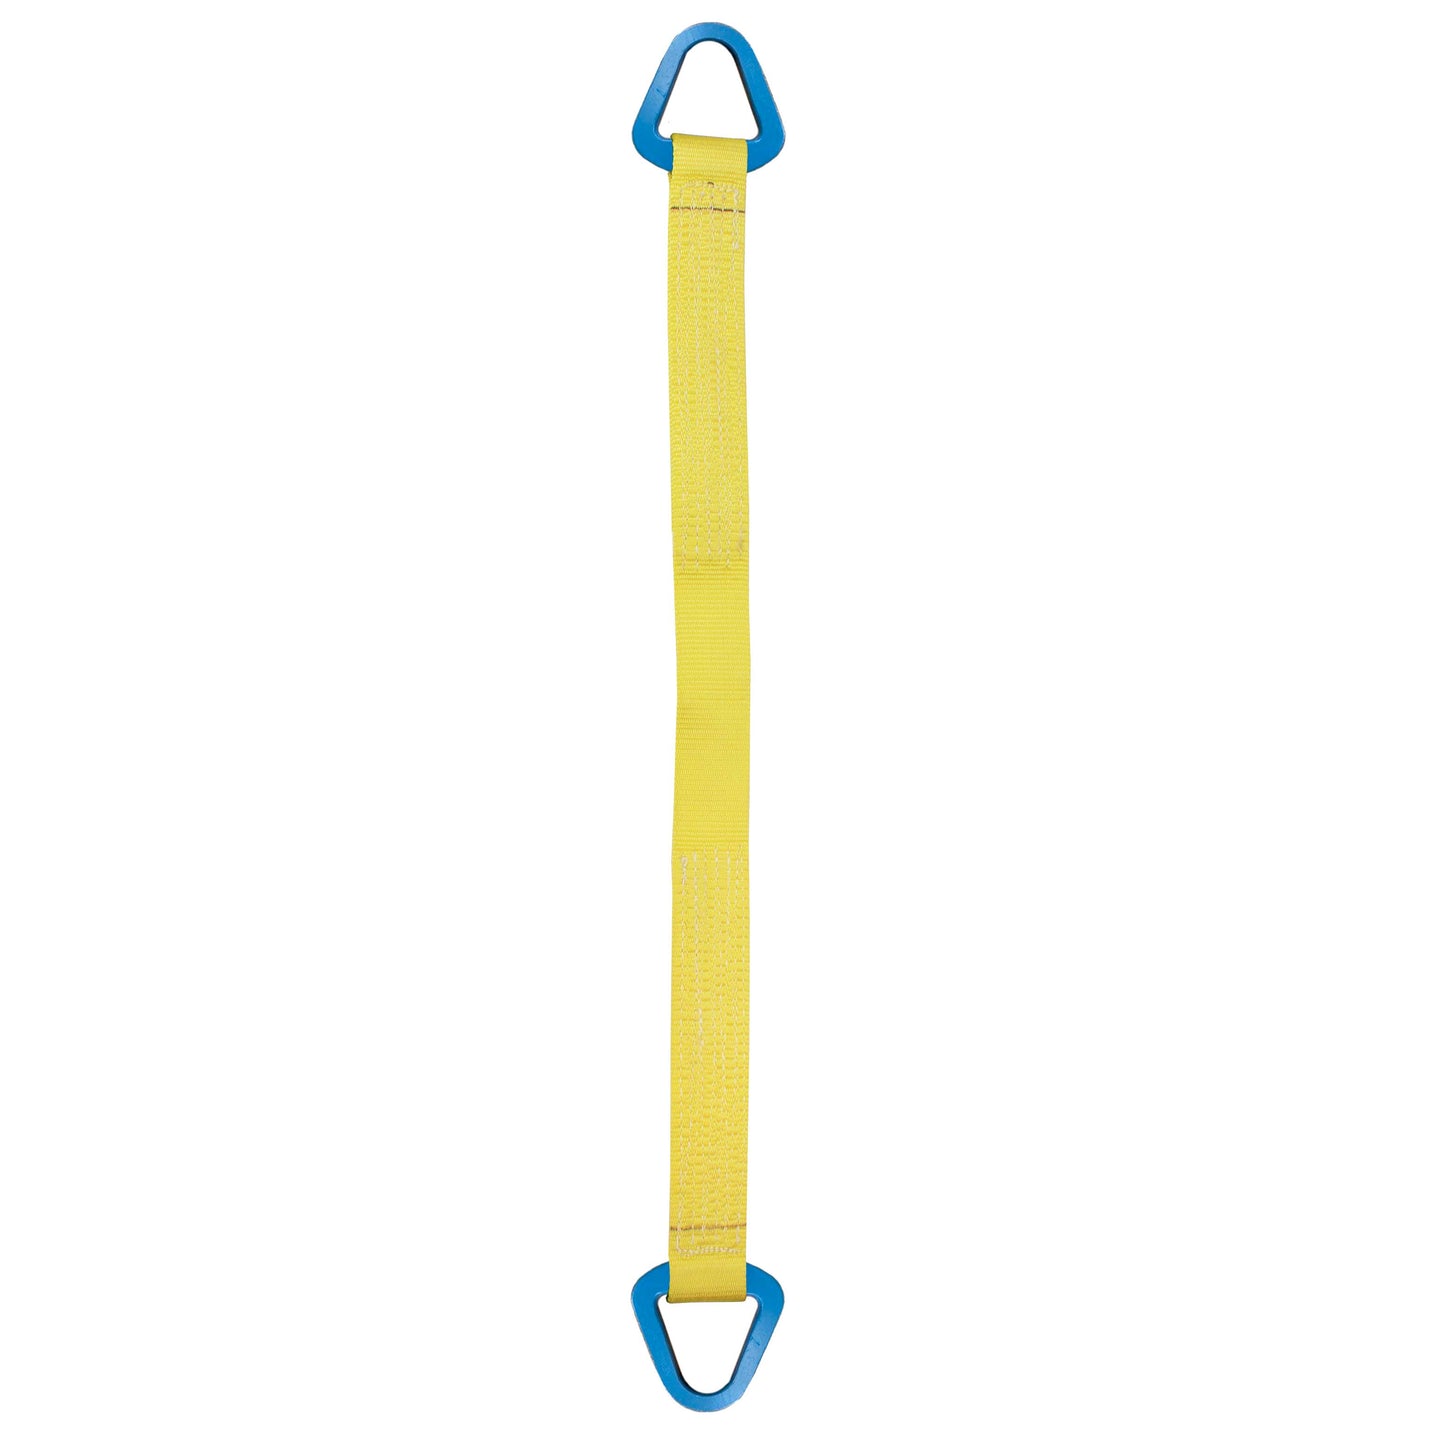 Nylon Lifting Sling Triangle 4 inch x 6 foot 1ply image 1 of 2